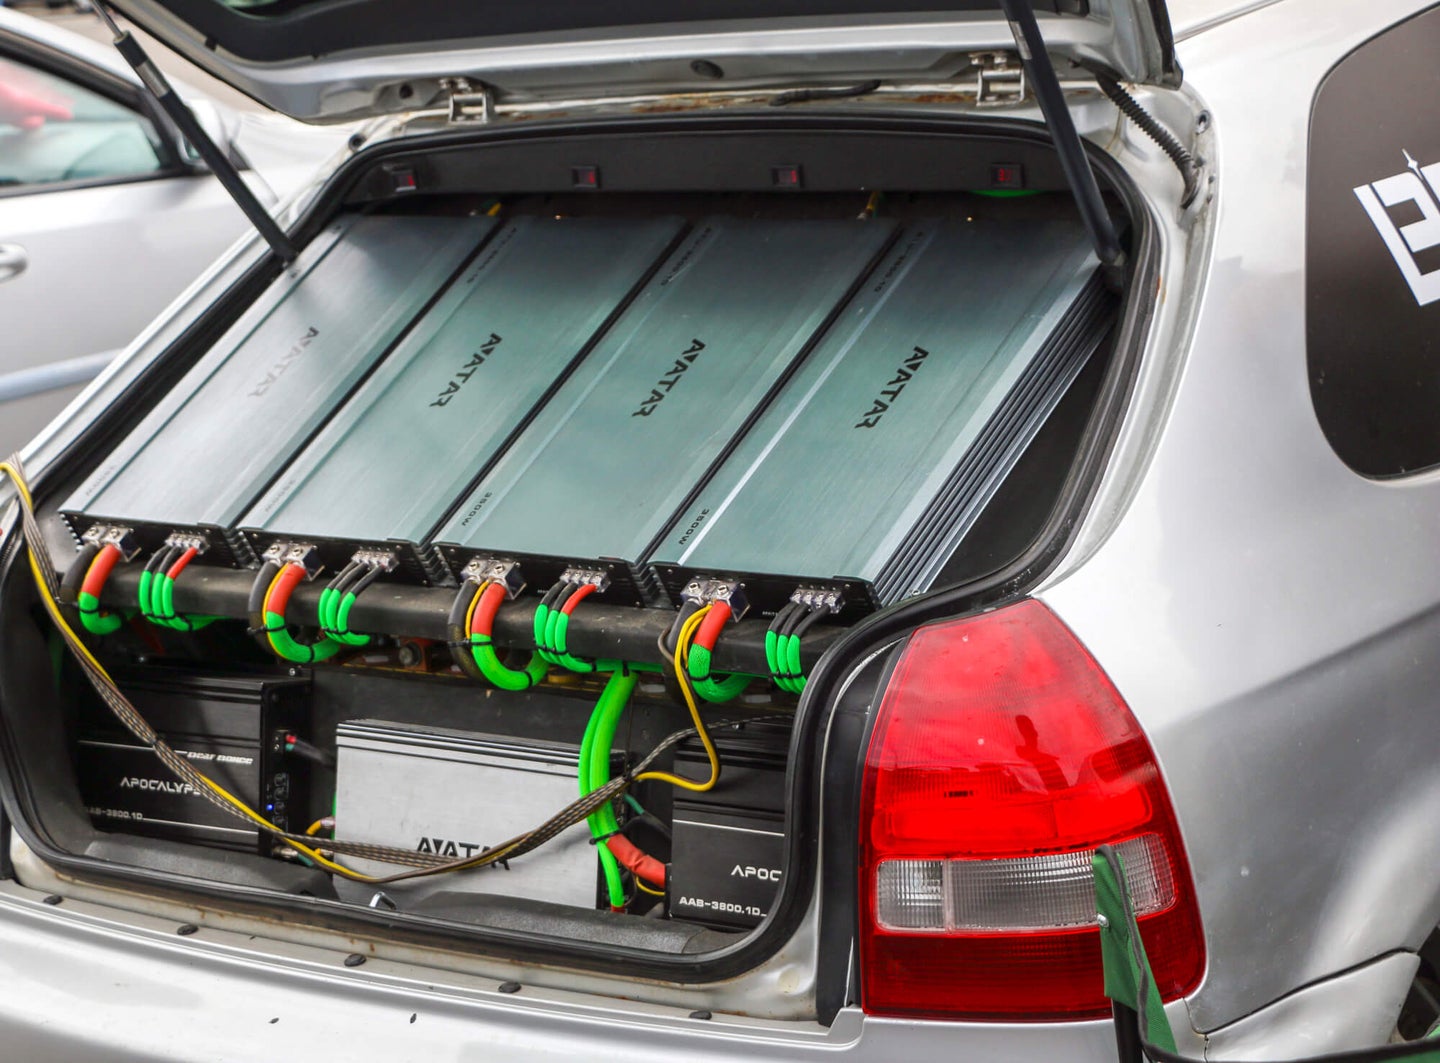 Best 4-Channel Car Amplifier: Get Clear and Solid Sound